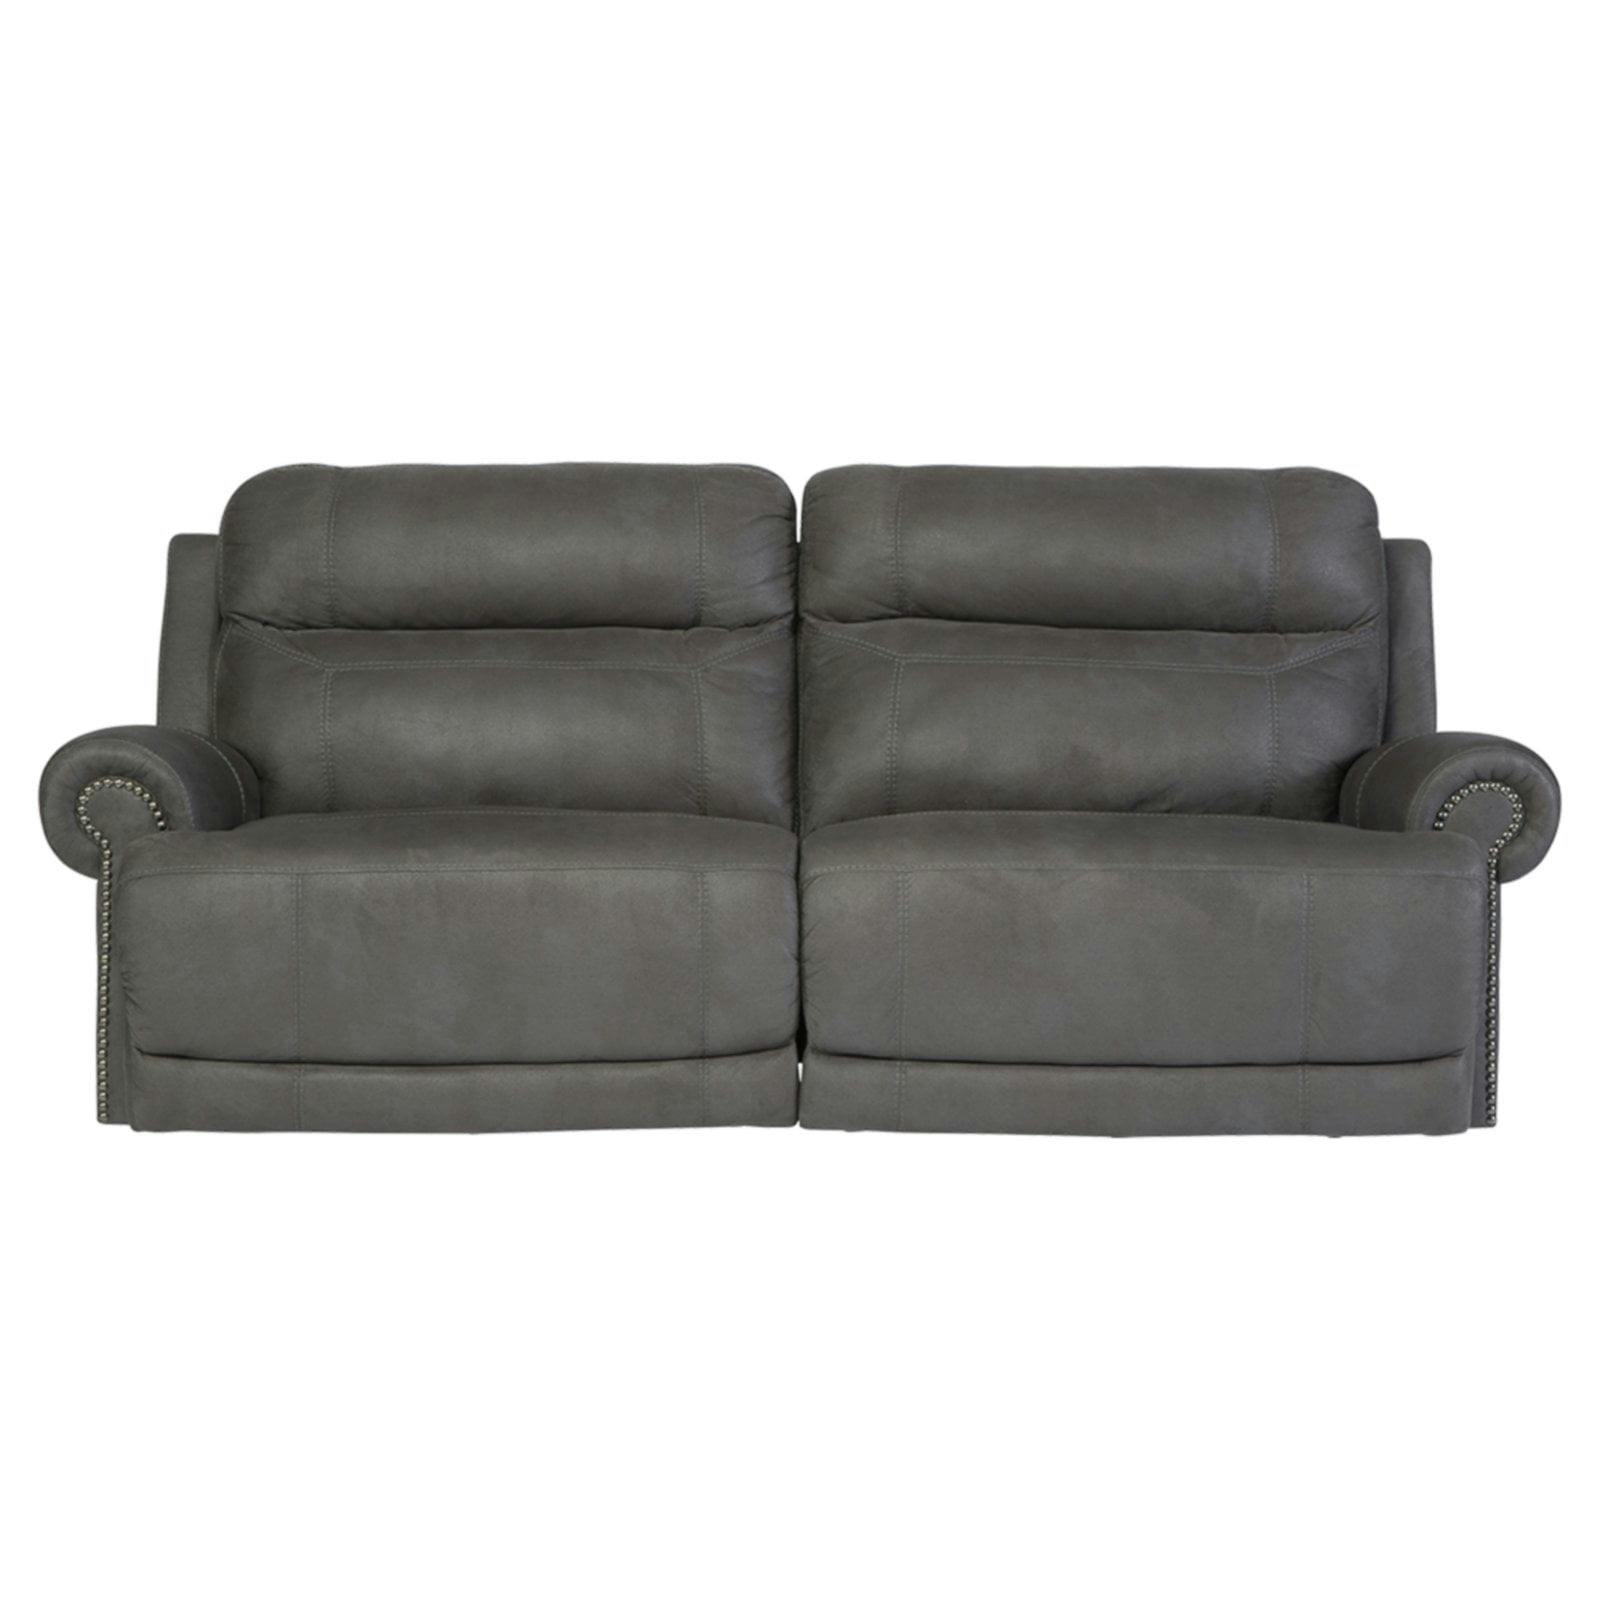 Luxurious Light Gray Faux Leather Reclining Sofa with Nailhead Accents